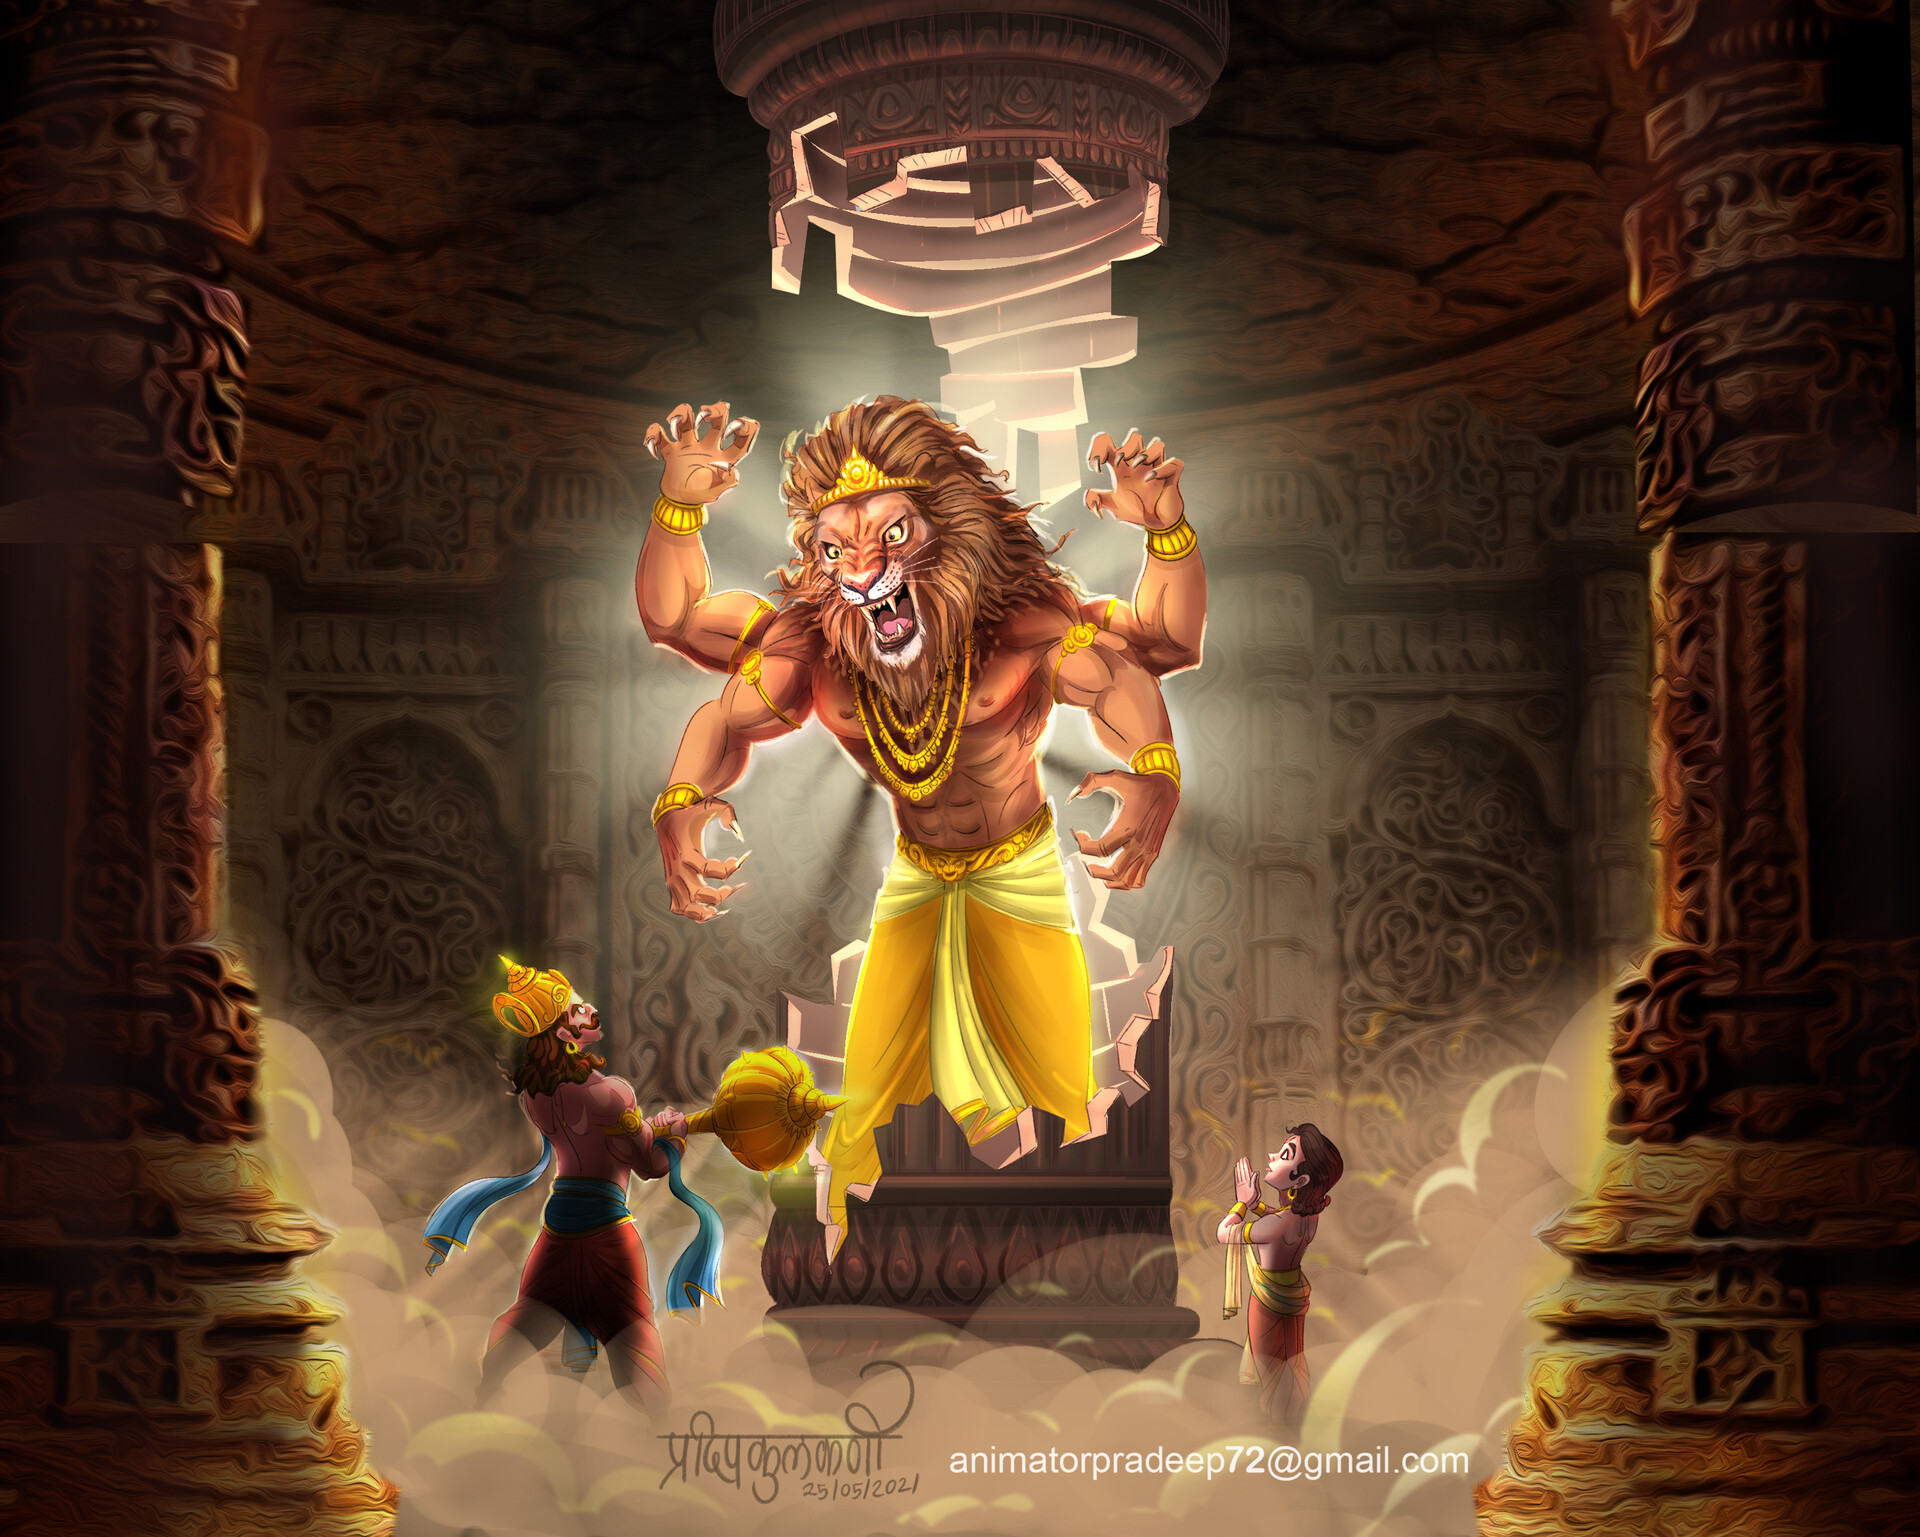 Download and Share God Narasimha Swamy Photos, and Images